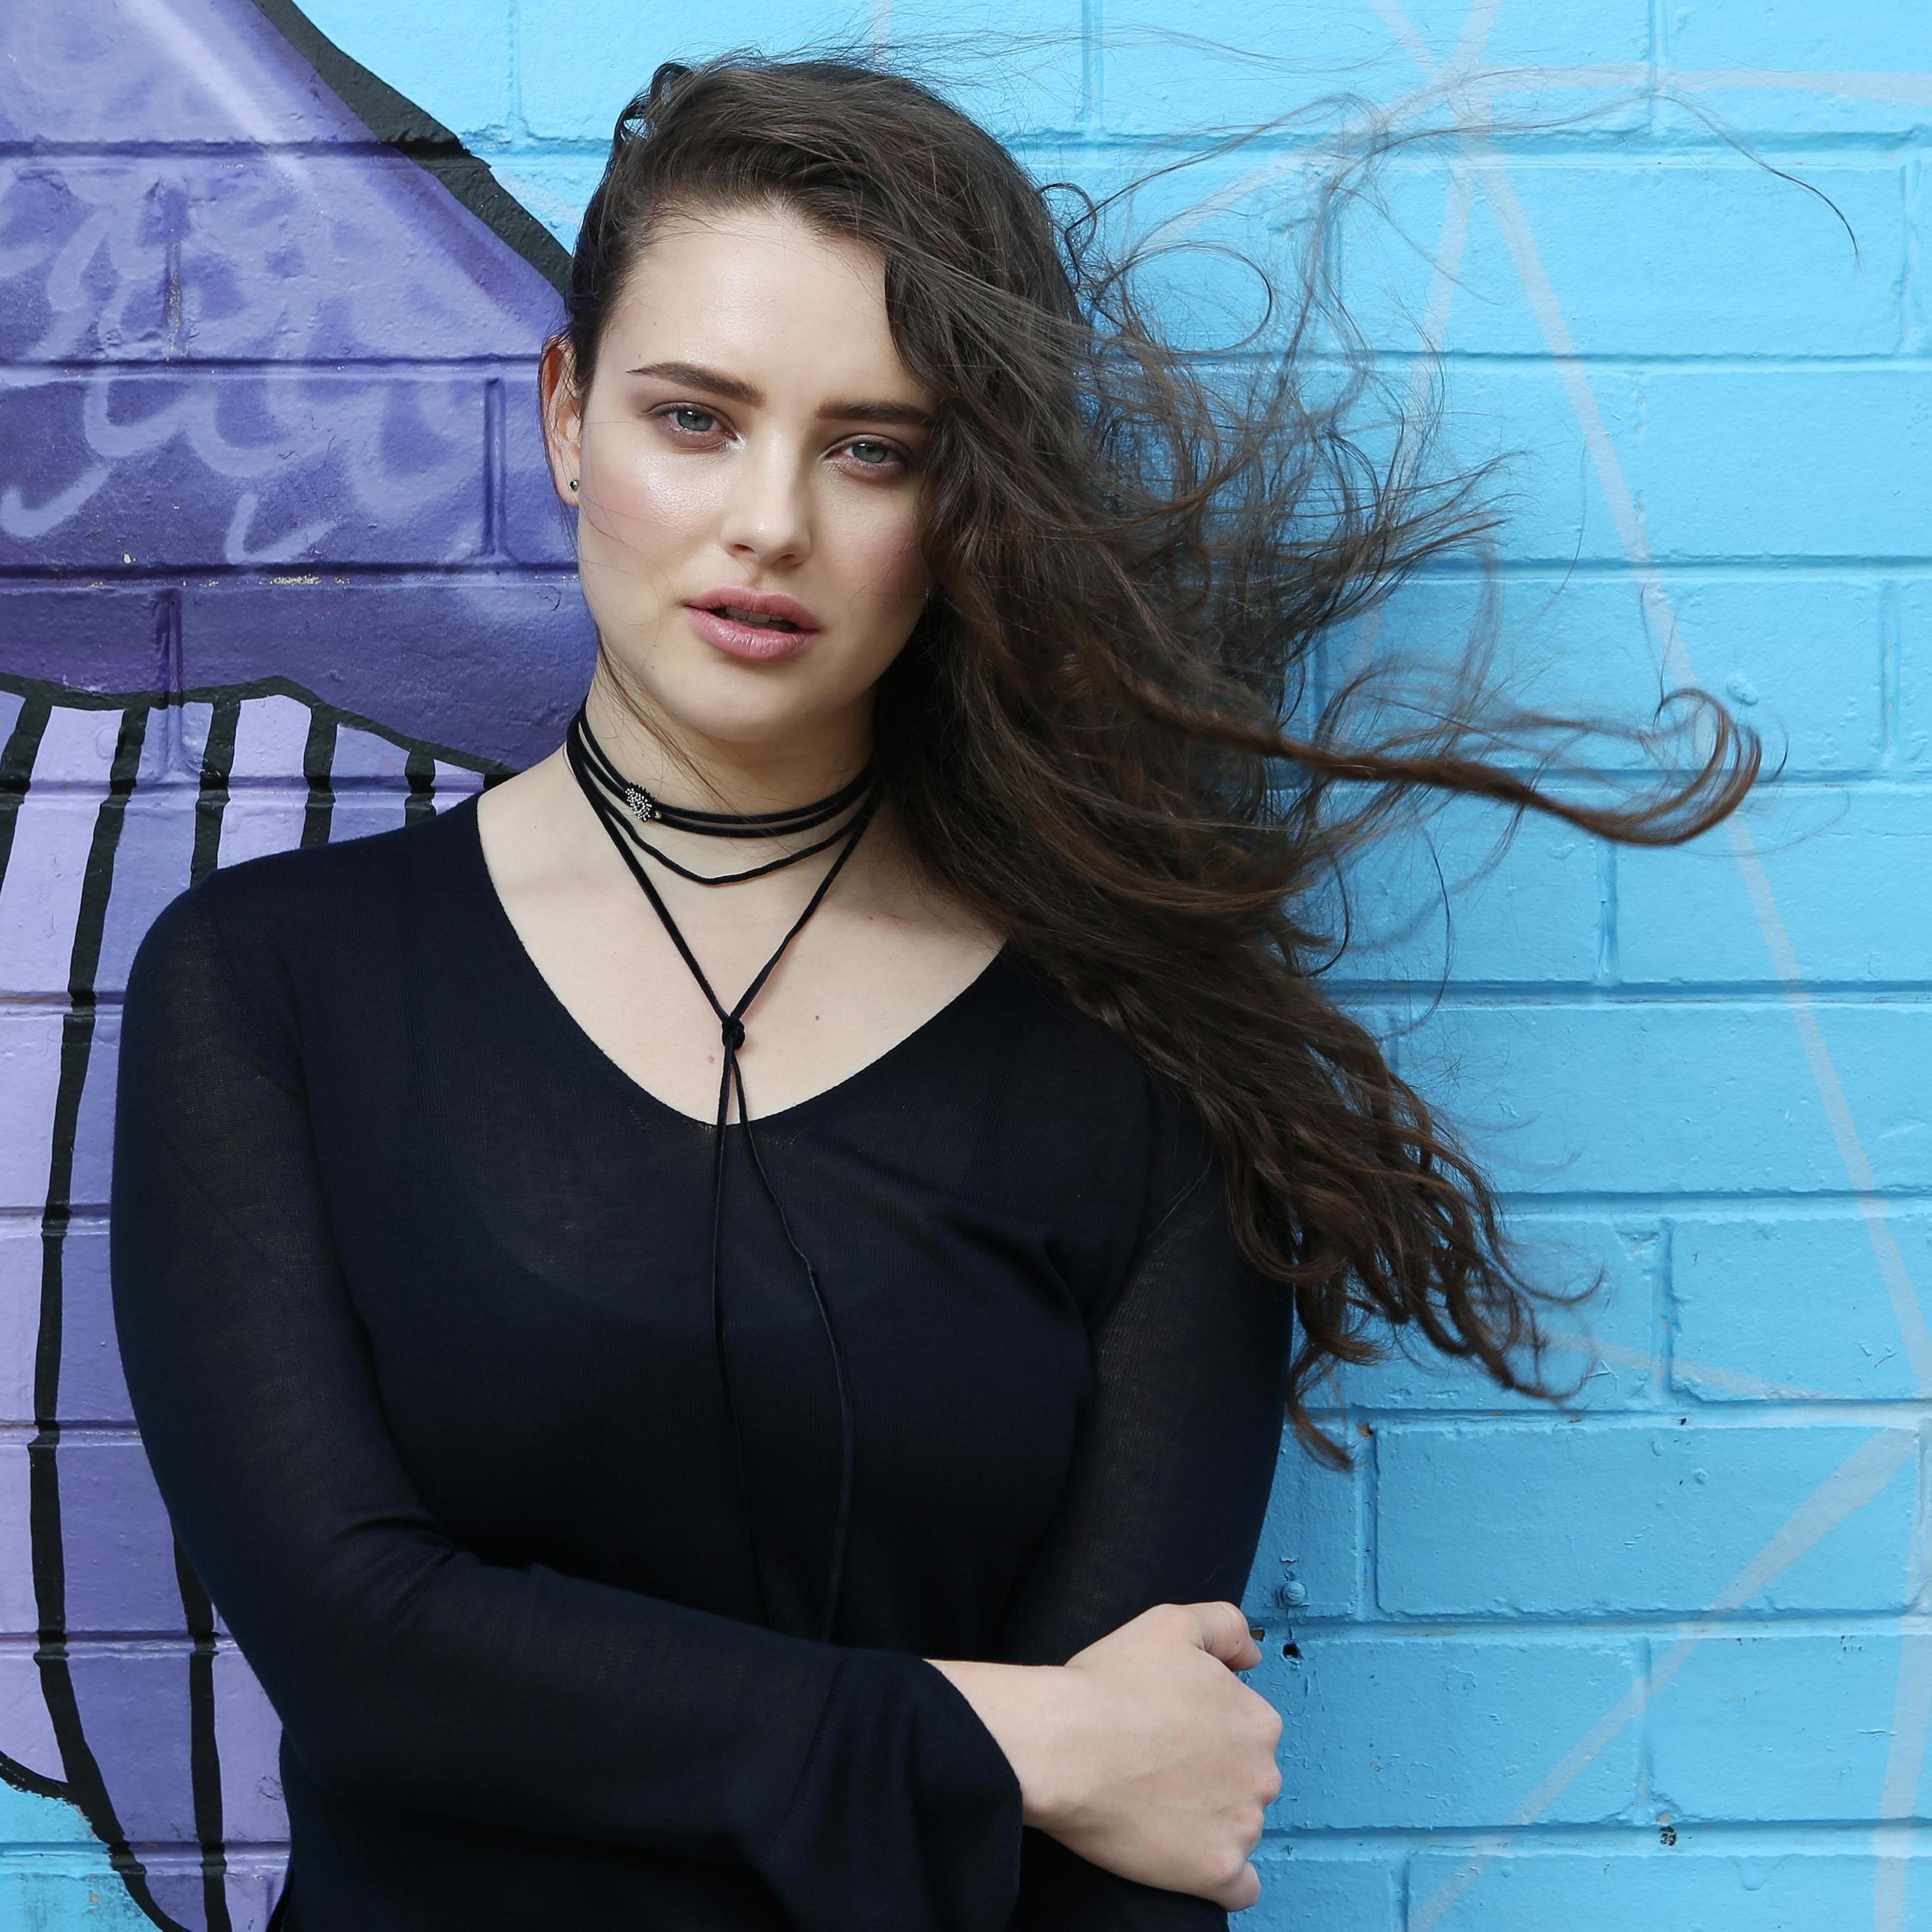 65+ Hot Pictures Of Katherine Langford – 13 Reasons Why Actress | Best Of Comic Books